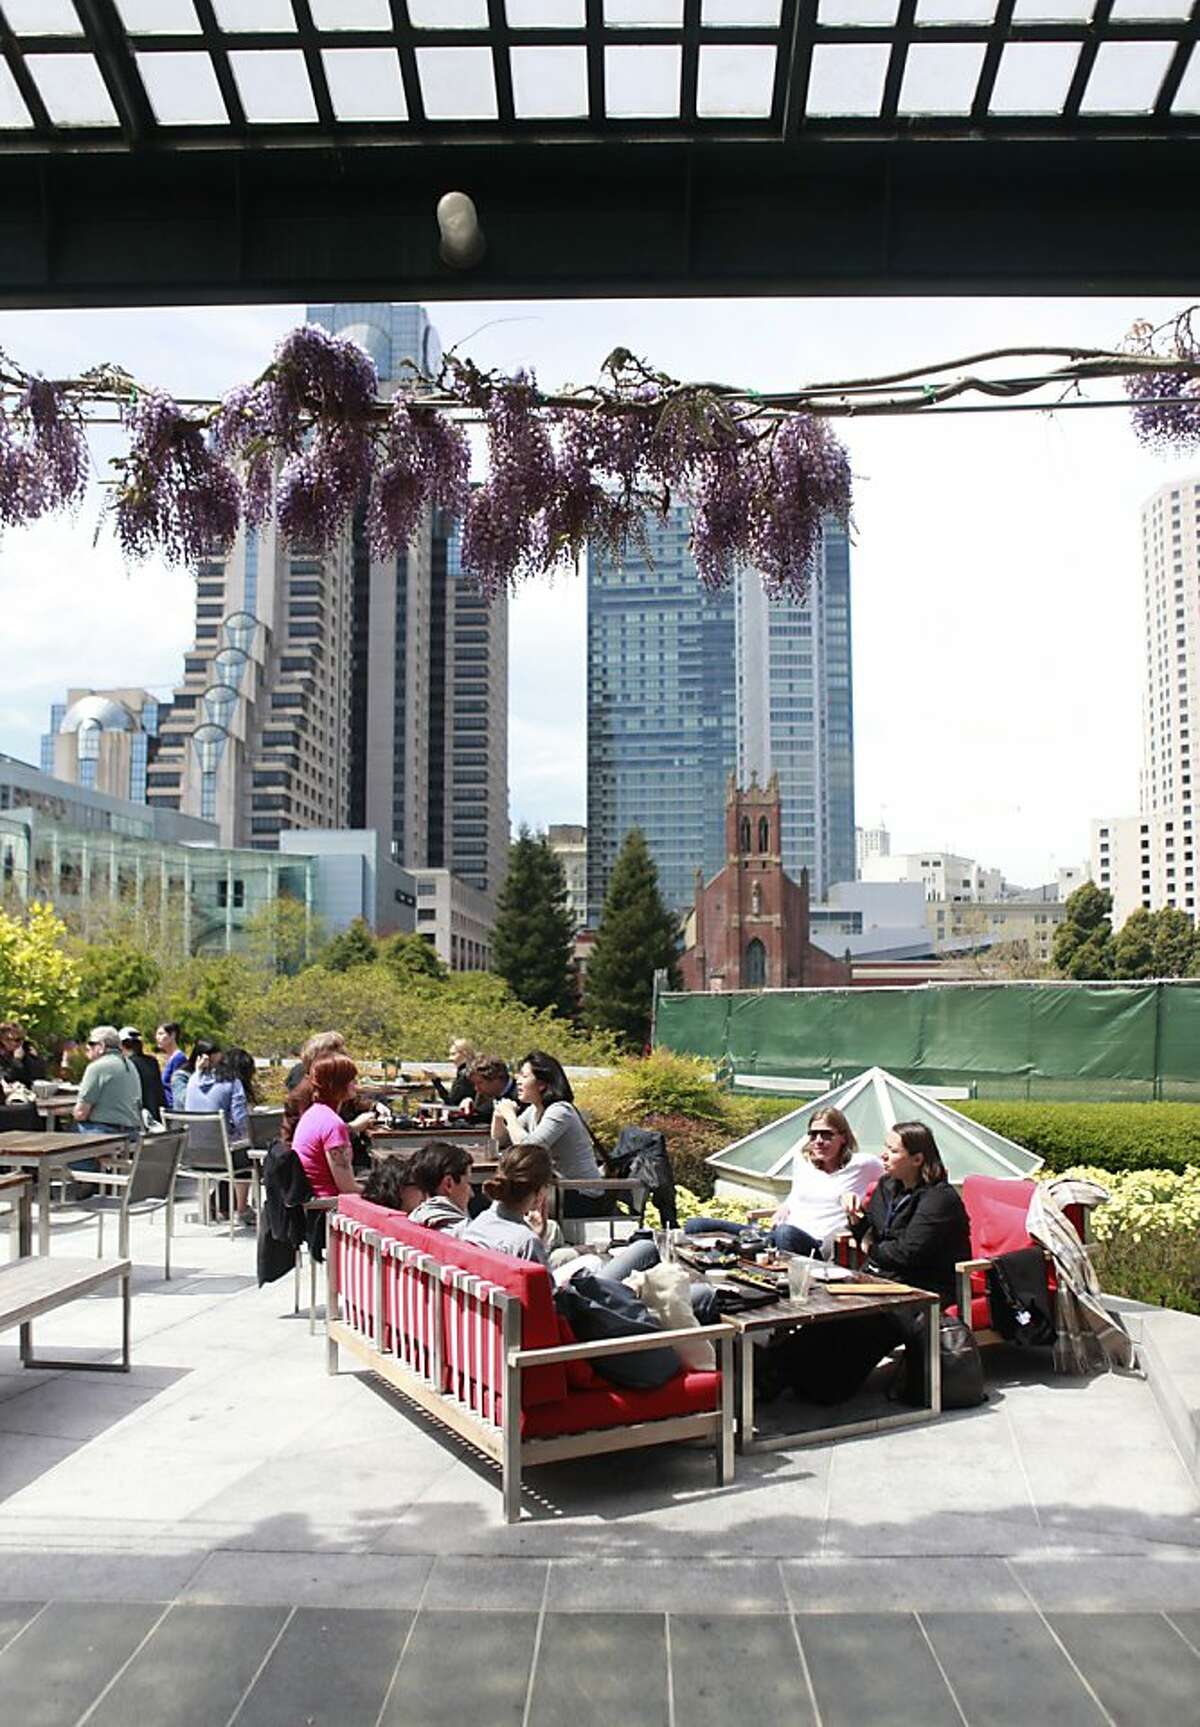 Outdoor dining terrace at the Yerba Buena Gardens and Metreon in San Francisco, California on Wednesday, April 18th, 2012